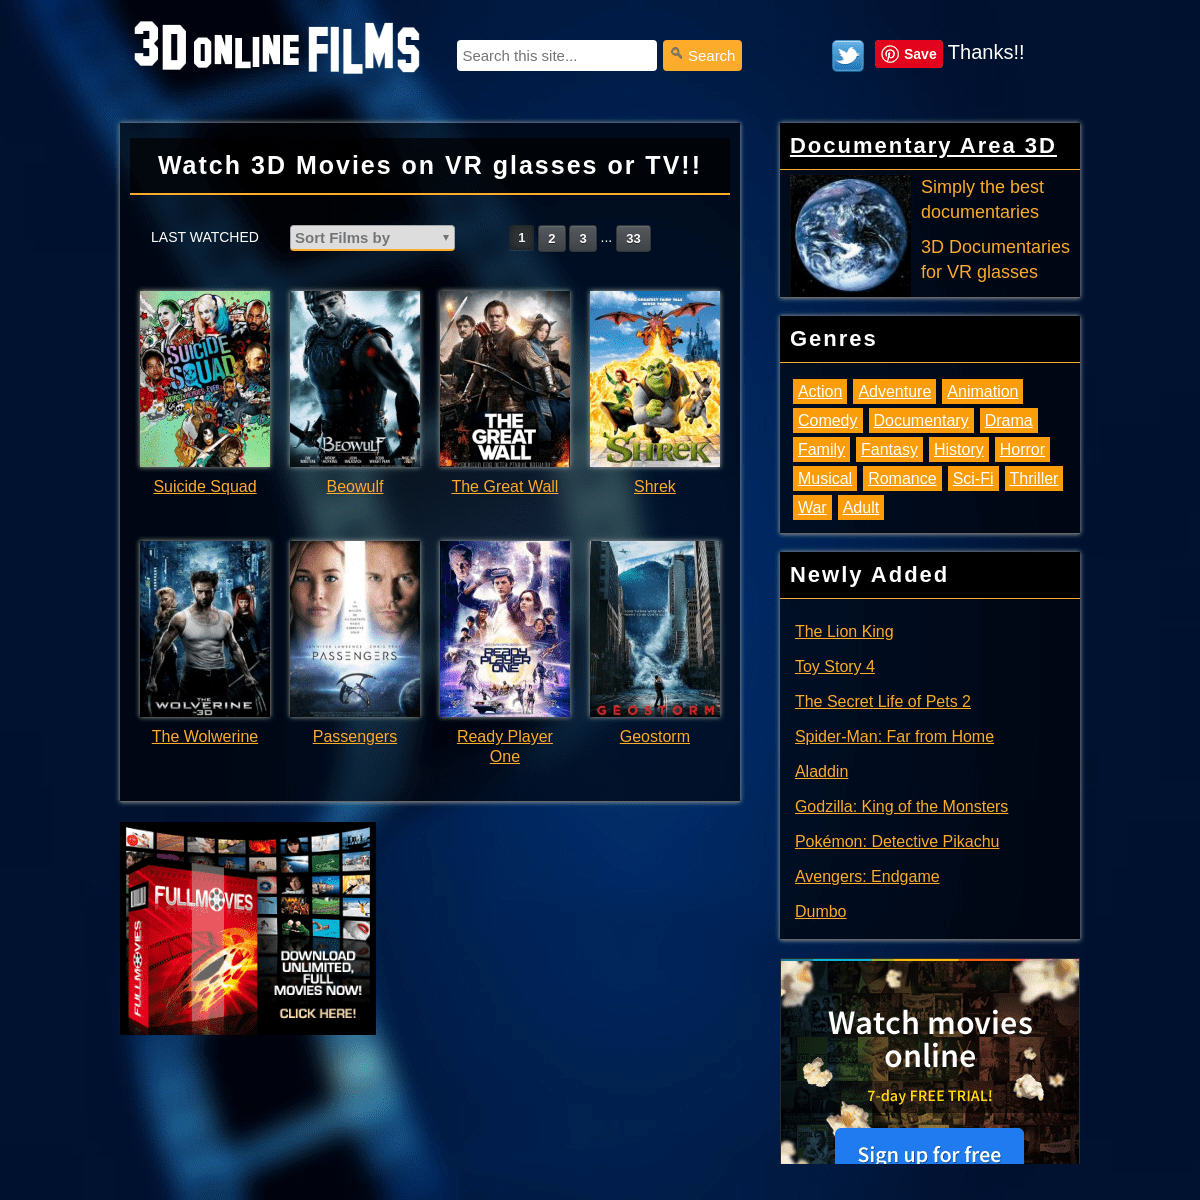 A complete backup of 3donlinefilms.com